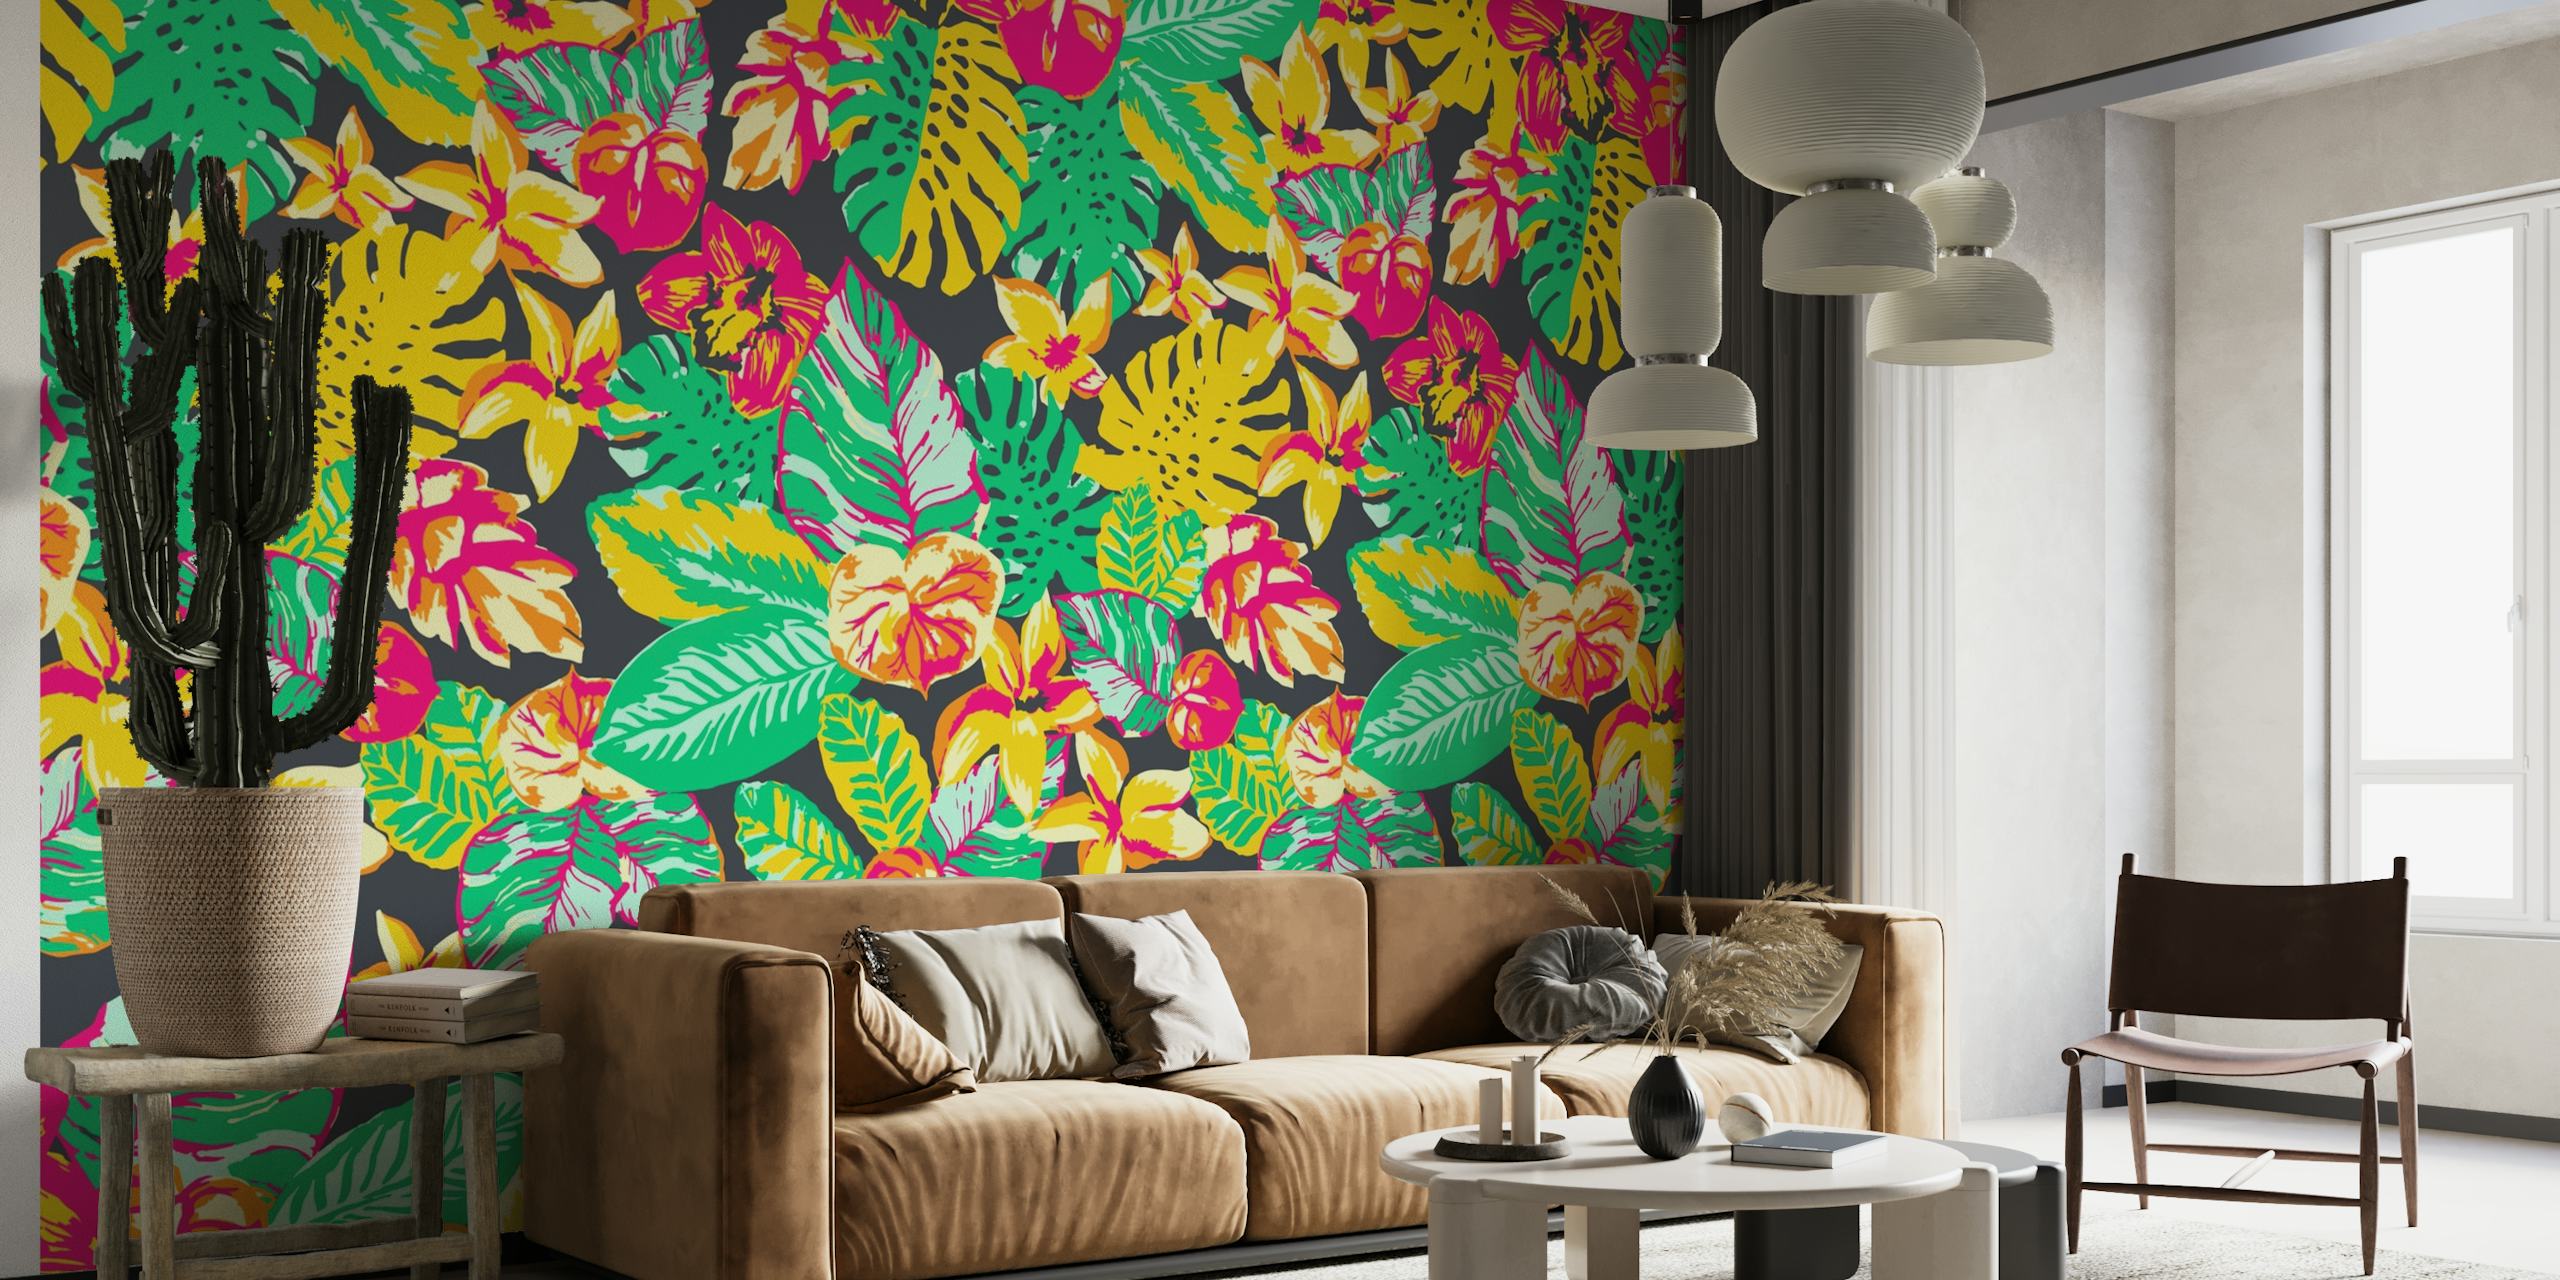 Colorful tropical jungle pattern wall mural with exotic foliage and flowers